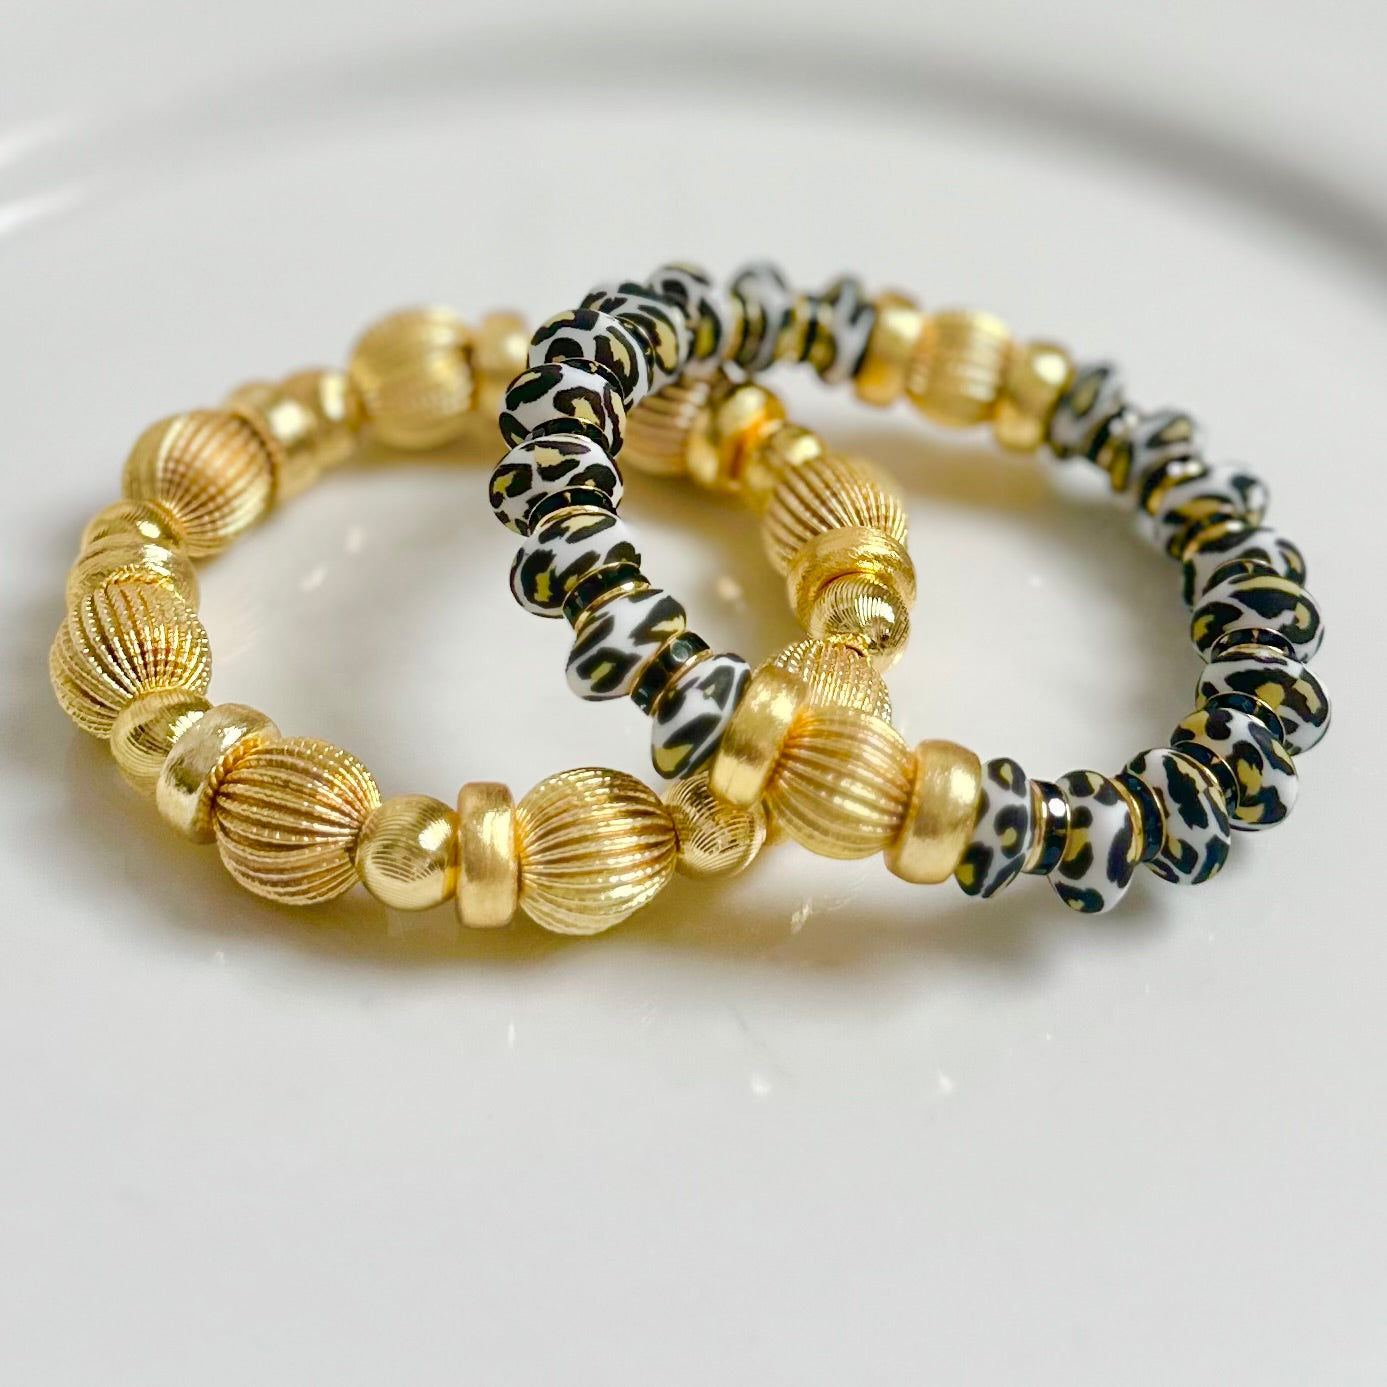 CHEETAH COIL BRACELET WITH BLACK CZ AND GOLD ACCENTS